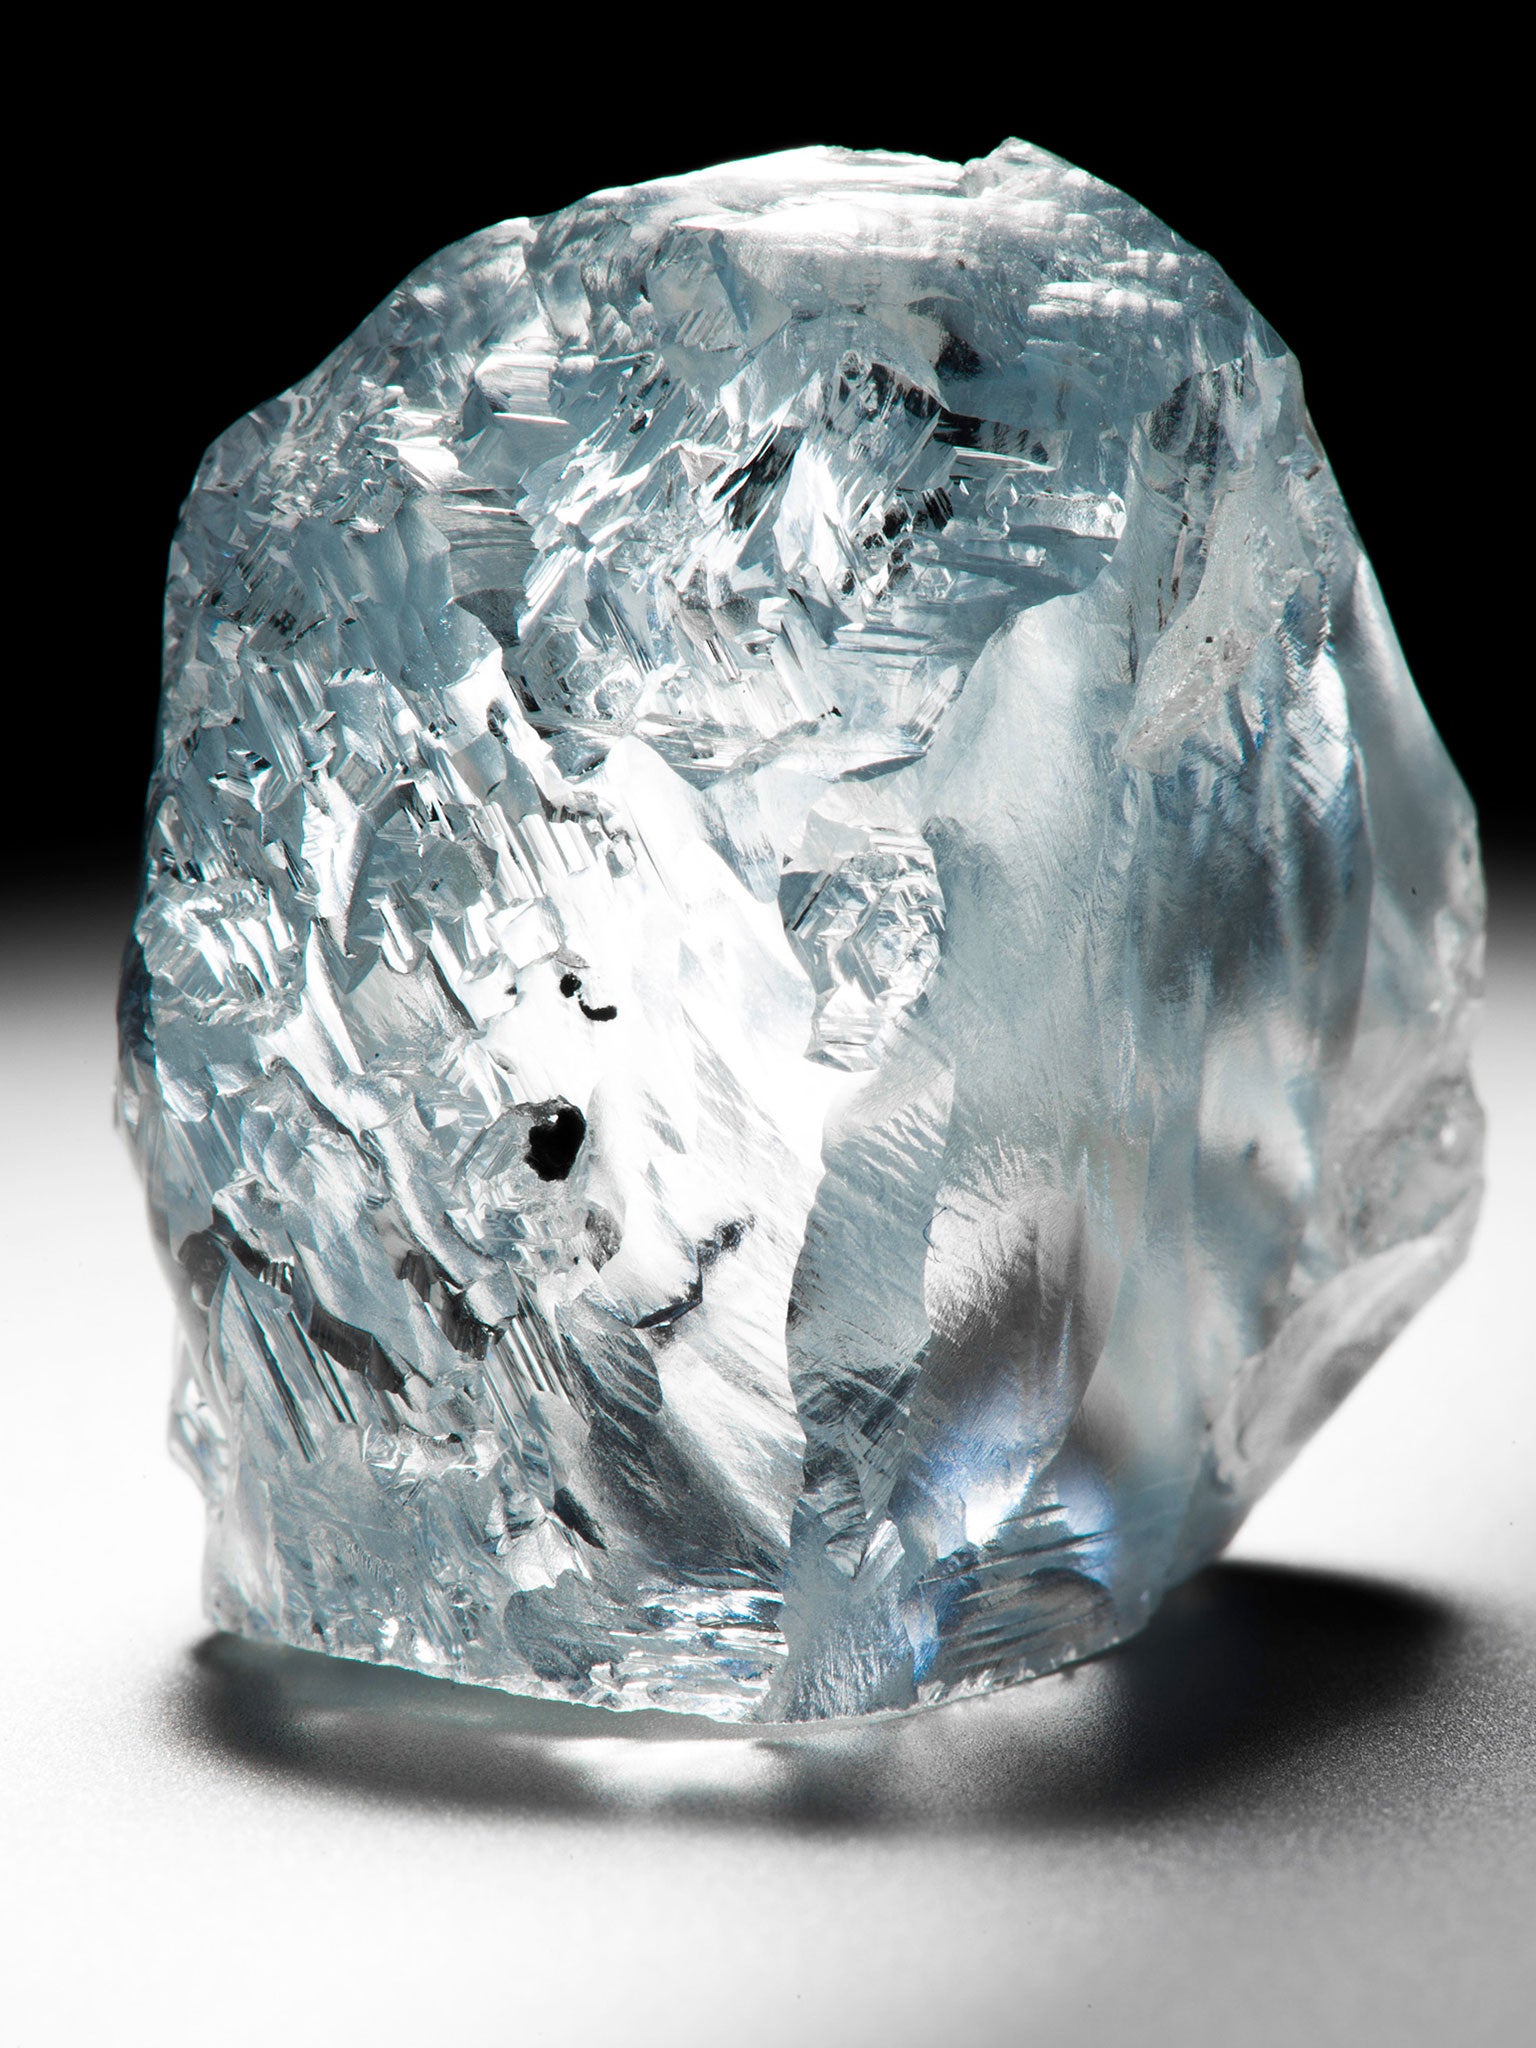 Rare blue diamond found in South Africa sold for £17m | The Independent